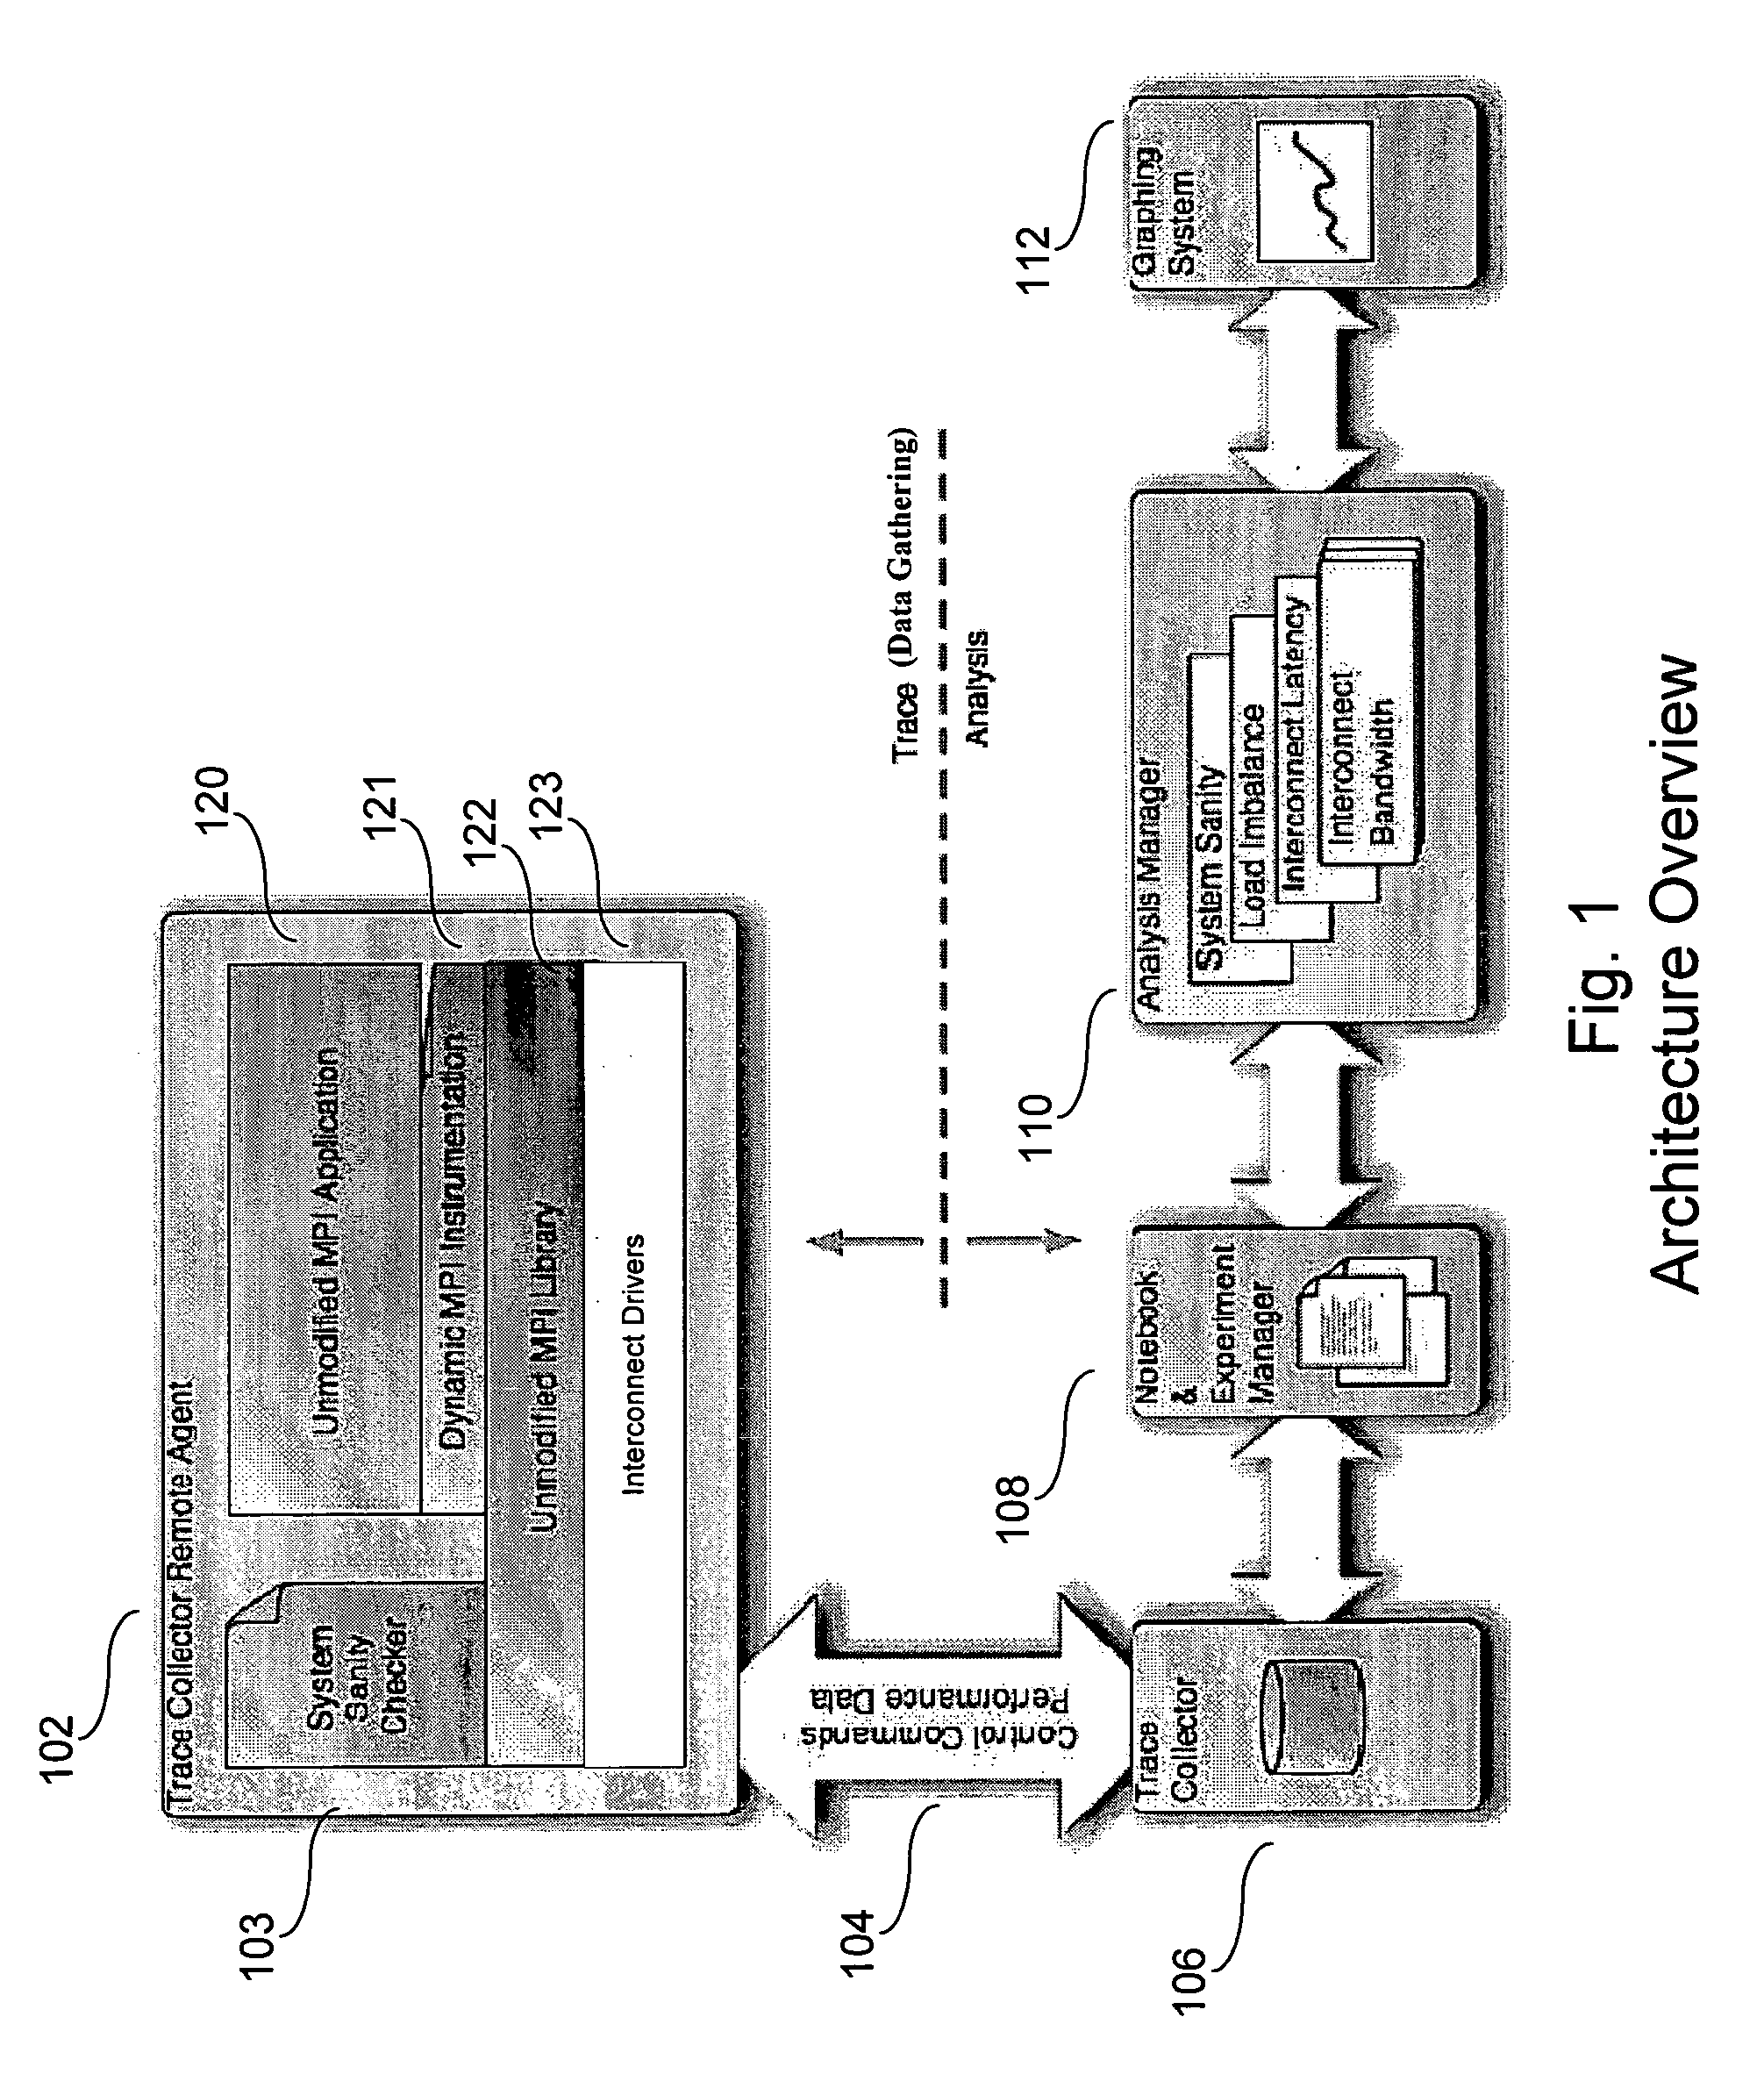 Clustered computing model and display